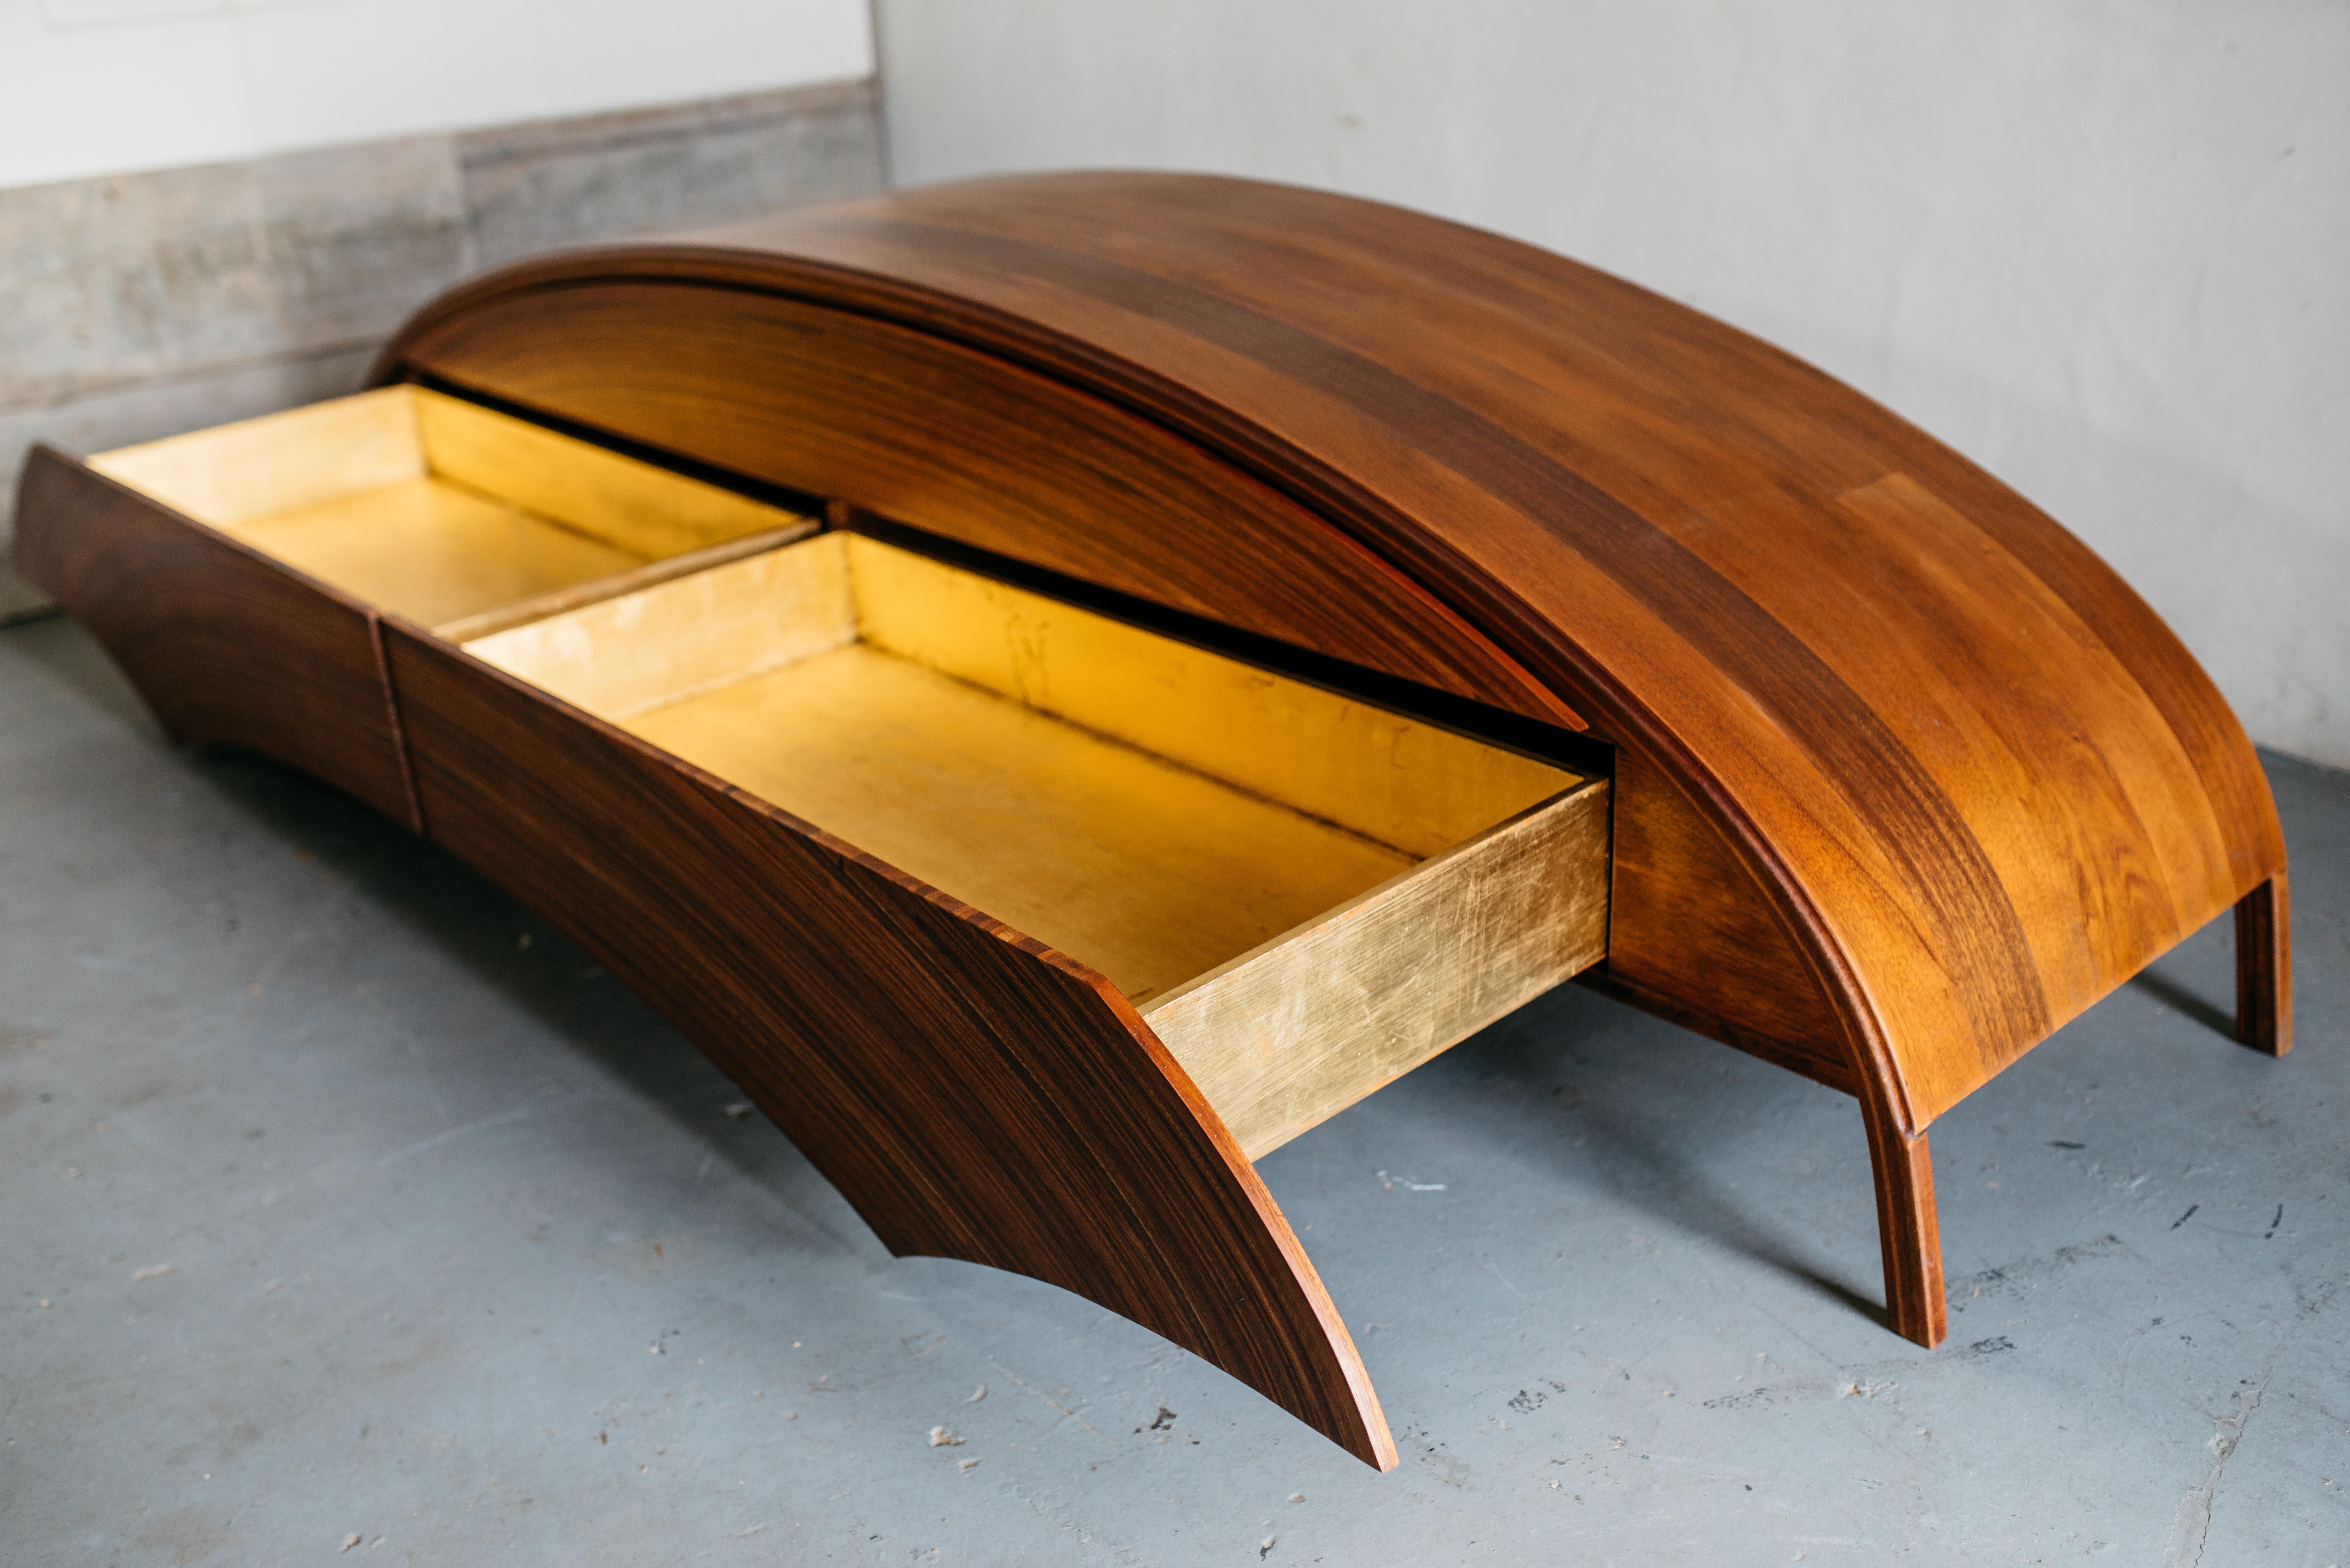 Designed and handcrafted with sustainable materials by Rafael Calvo, the Heirloom Dresser features a unique curved silhouette made of reclaimed, solid Mahogany and finished with a non-toxic plant-based oil to bring the grain to life. The Heirloom